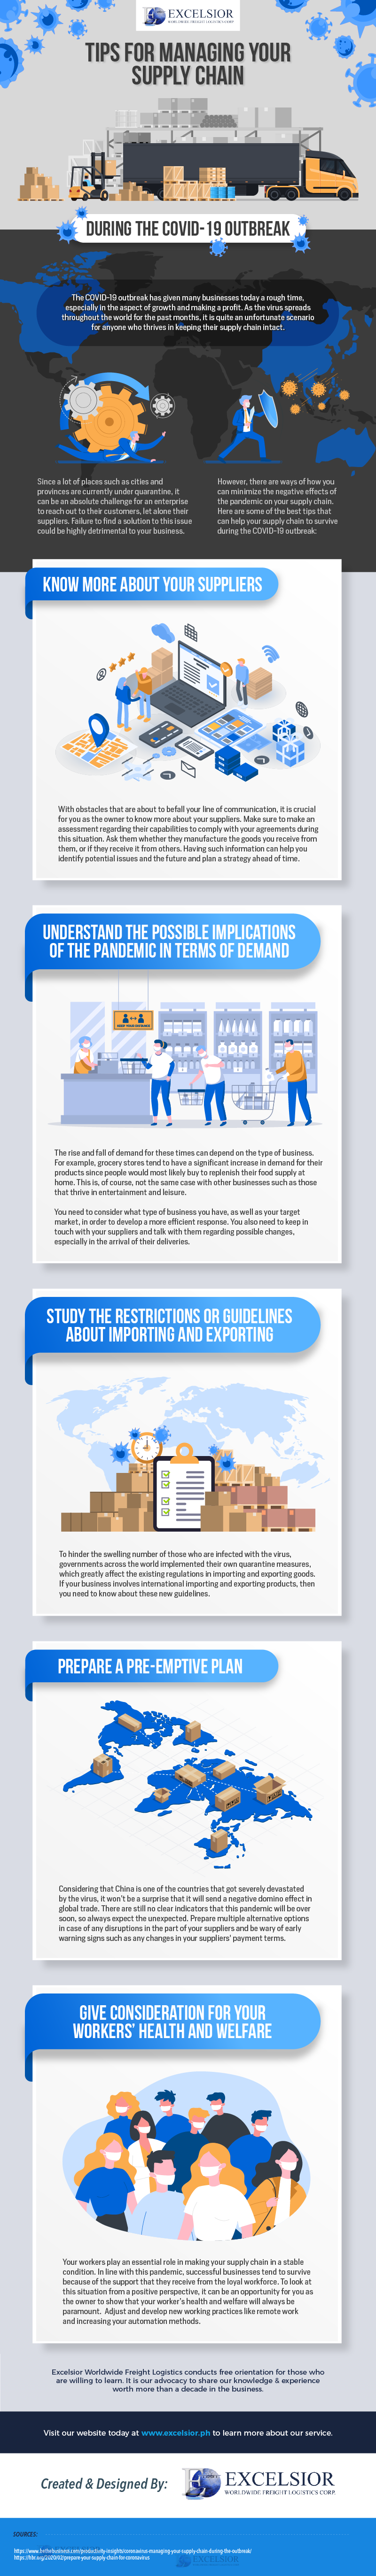 Tips for Managing your Supply Chain during the COVID-19 Outbreak - Infographic